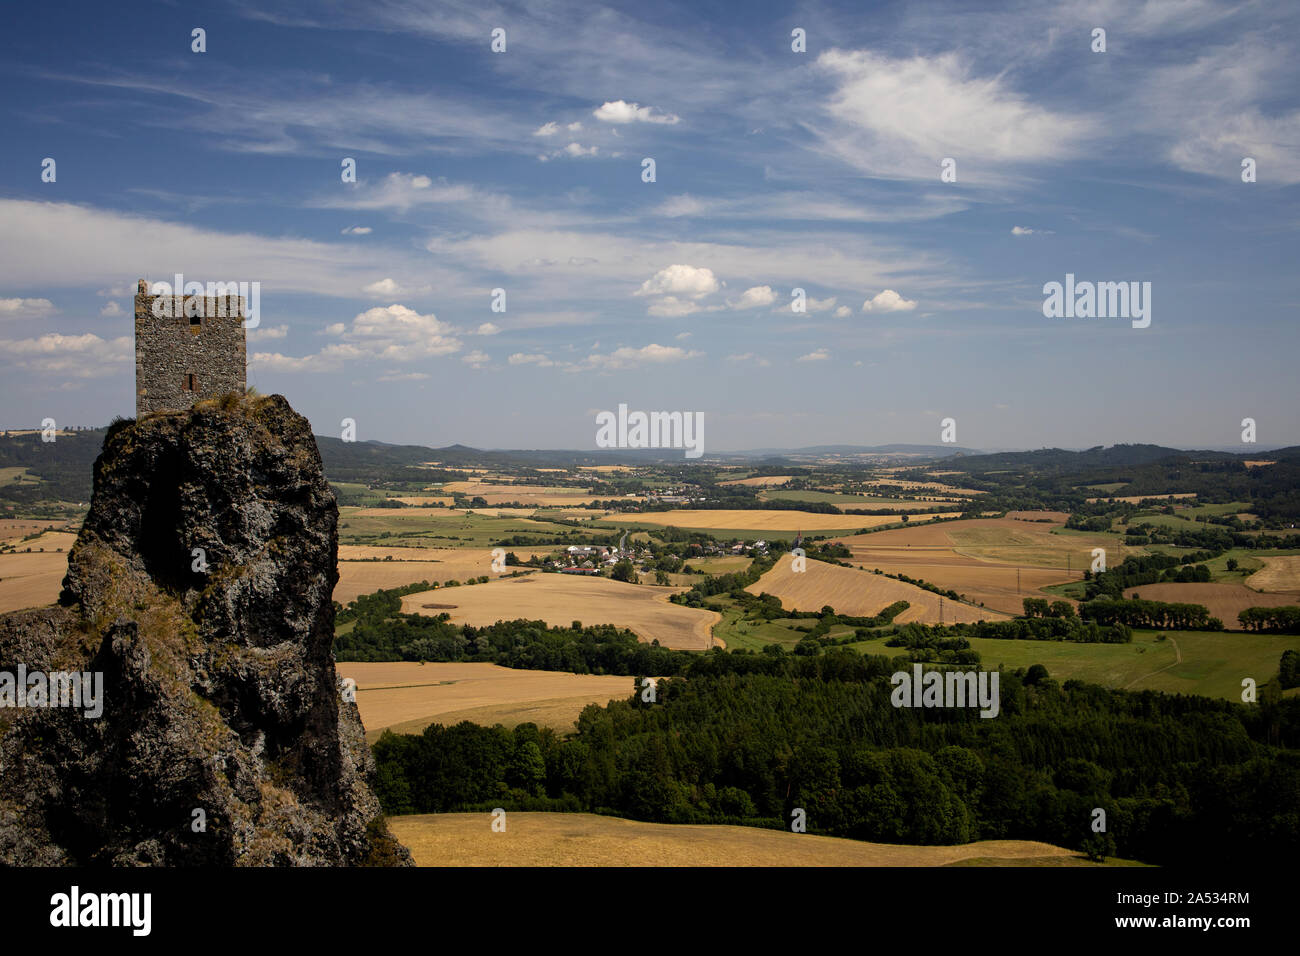 Old castle on the hill, Hrad Trosky, castle in the Czech Republic, Bohemian Paradise Stock Photo